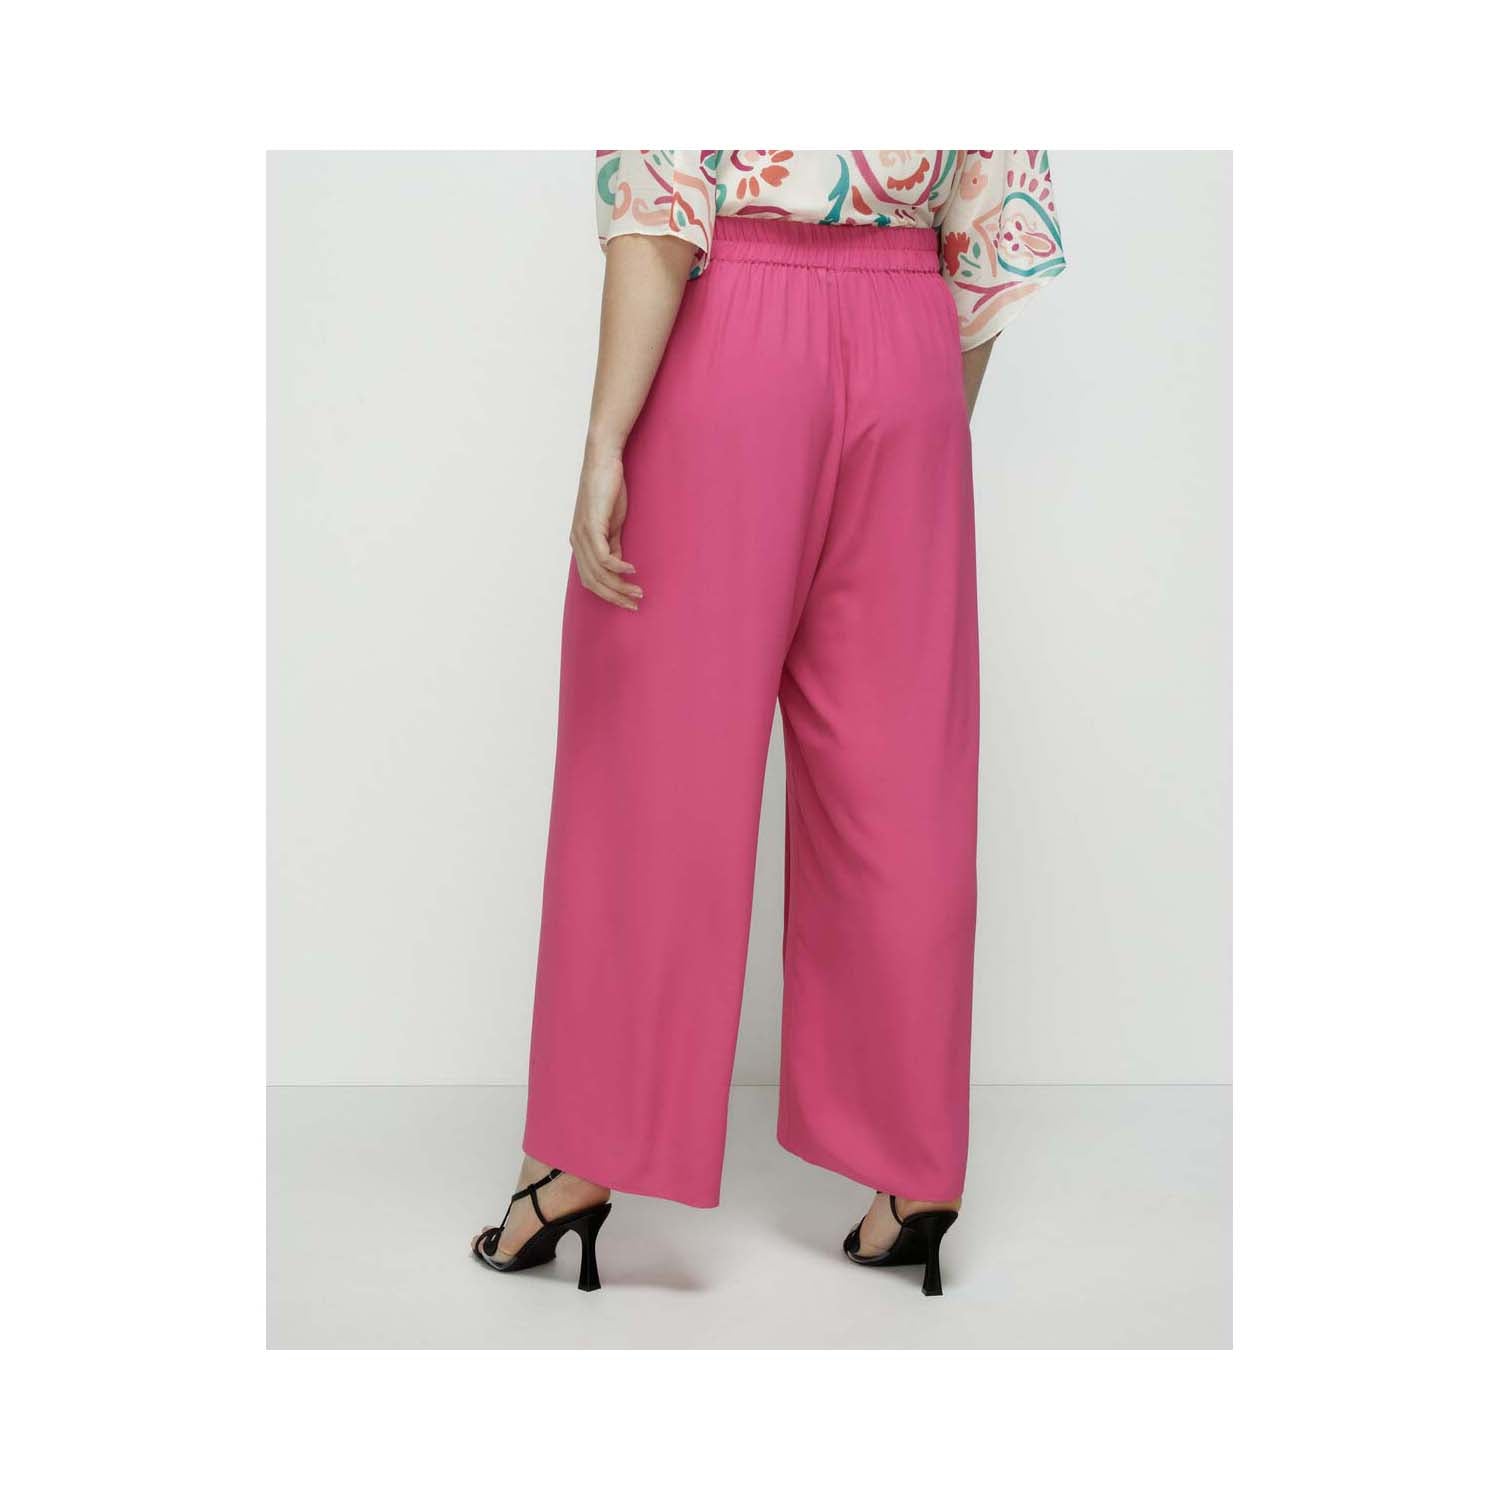 Couchel Plain-Coloured Loose-Fitting Wide-Leg Trousers - Fuchsia 3 Shaws Department Stores